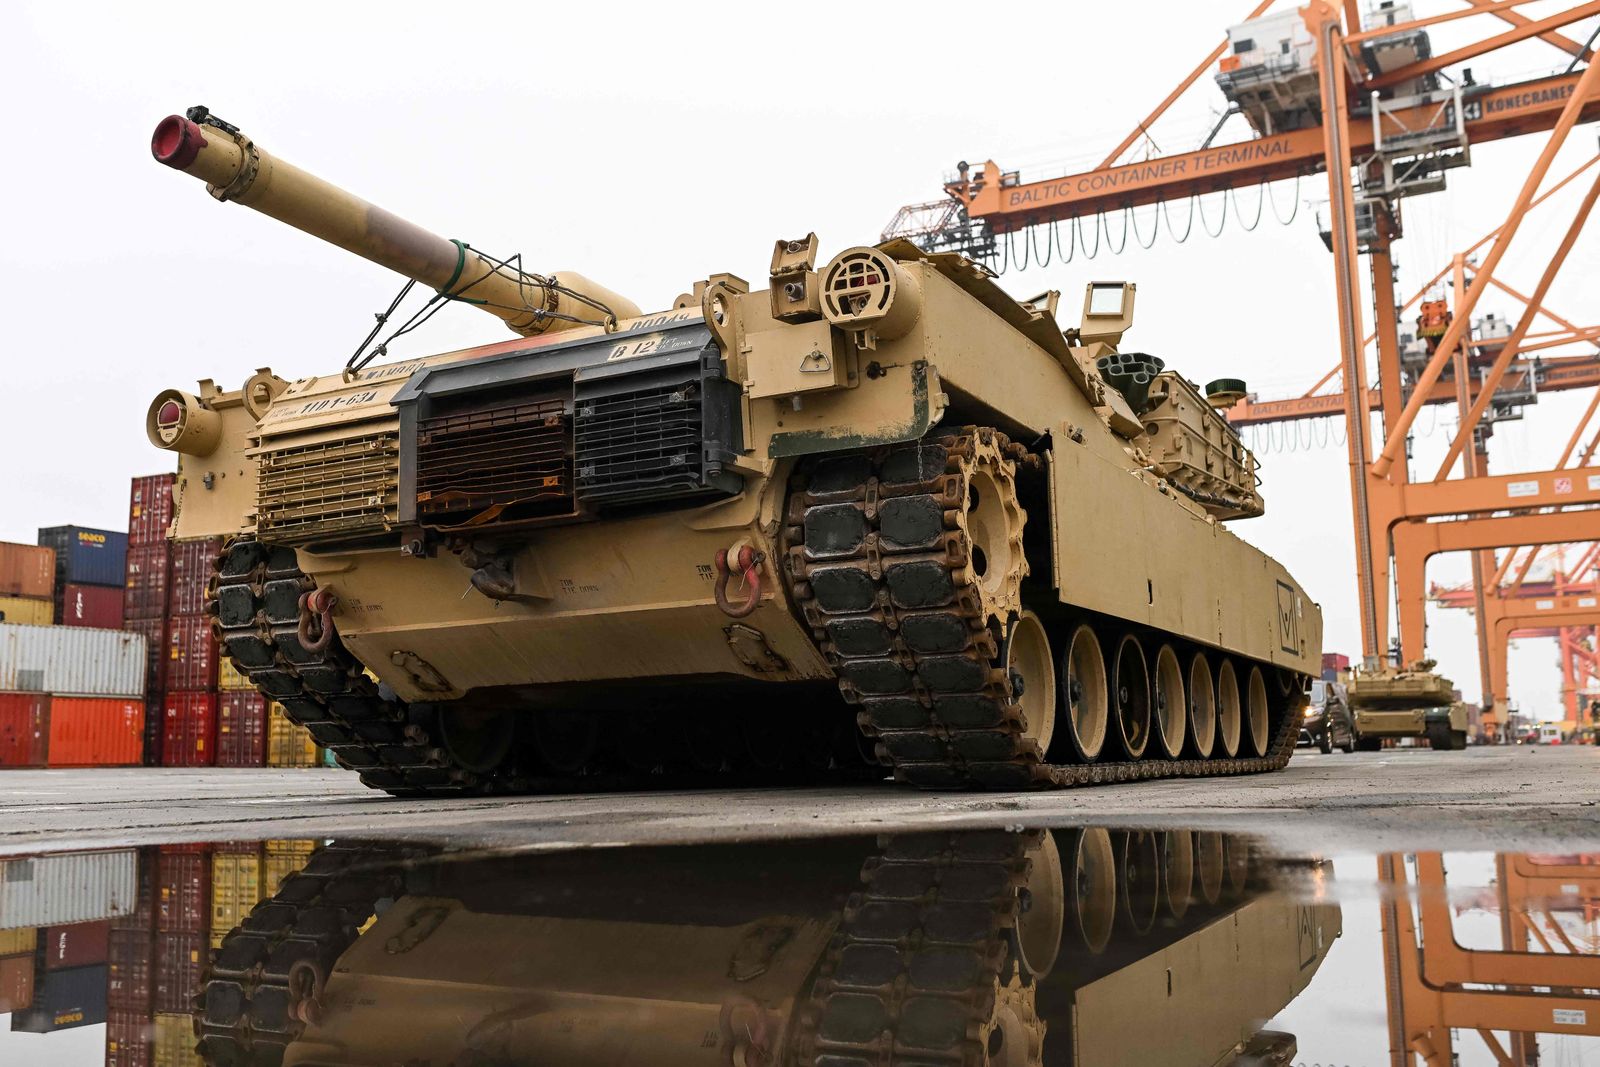 (FILES) In this file photo taken on December 3, 2022, an M1A2 Abrams battle tank of the US army that will be used for military exercises by the 2nd Armored Brigade Combat Team, is unloaded at the Baltic Container Terminal in Gdynia, Poland. - US President Joe Biden announced on January 25, 2023, the US will send 31 Abrams tanks to Ukraine. (Photo by MATEUSZ SLODKOWSKI / AFP)